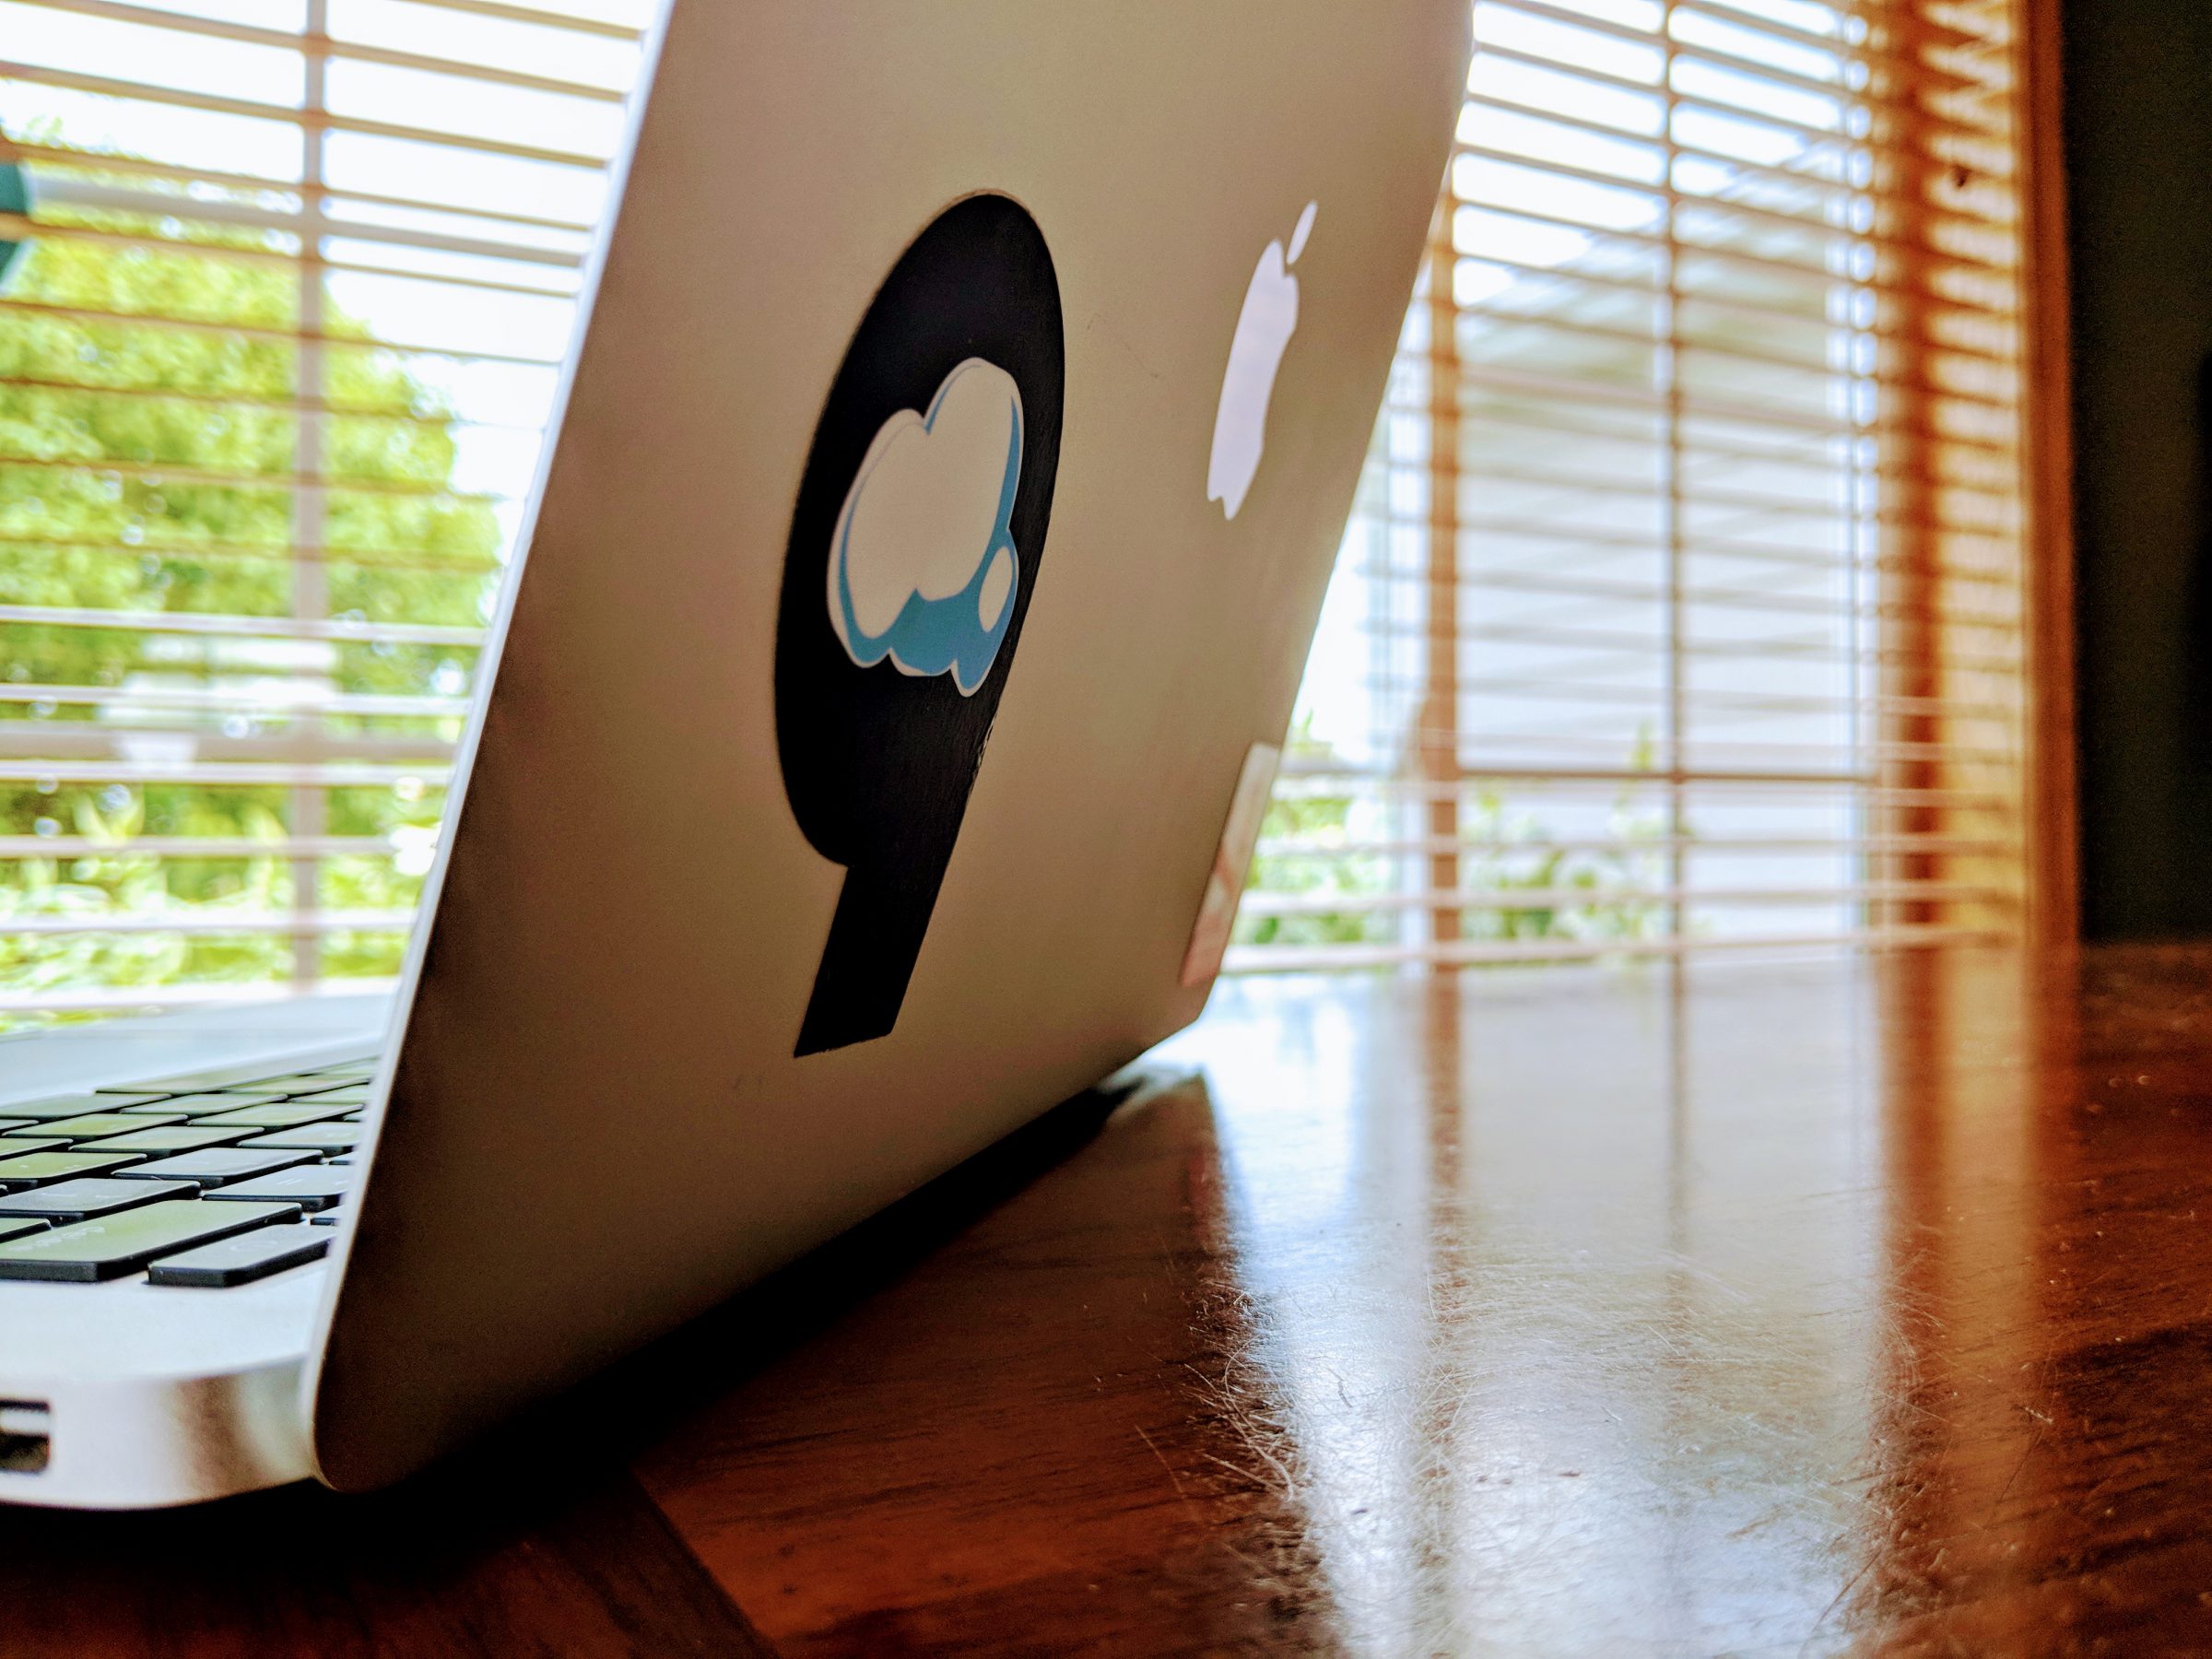 Gettin’ Personal: How Laptop Stickers Reflect Our Office Culture